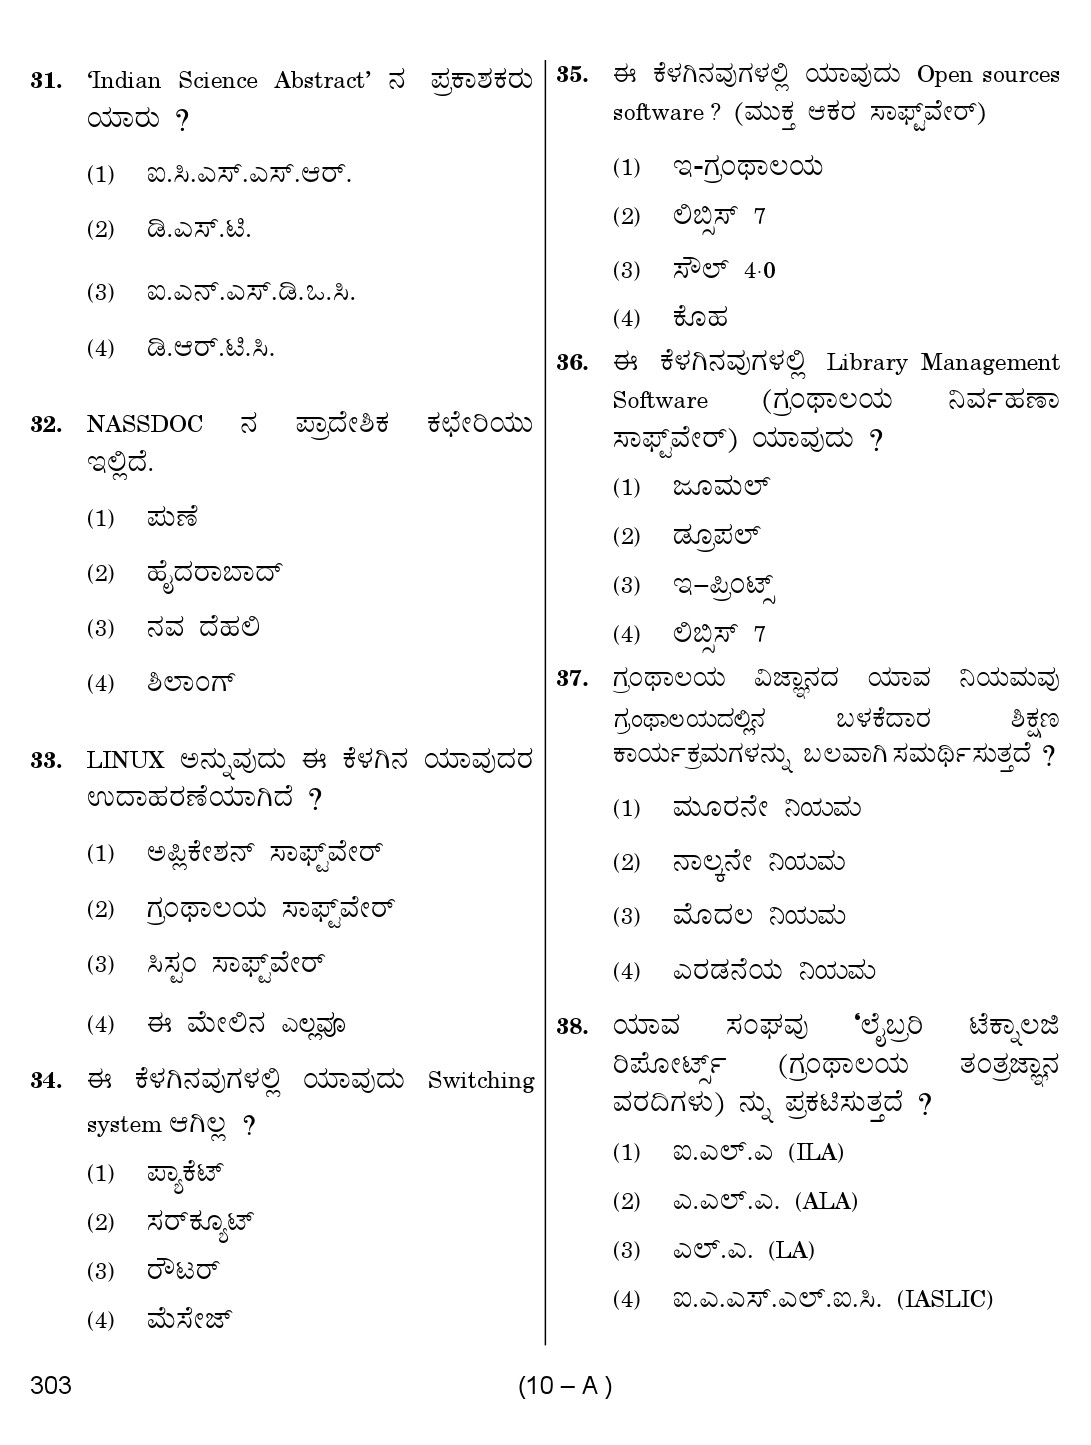 Karnataka PSC 303 Specific Paper II Librarian Exam Sample Question Paper 10